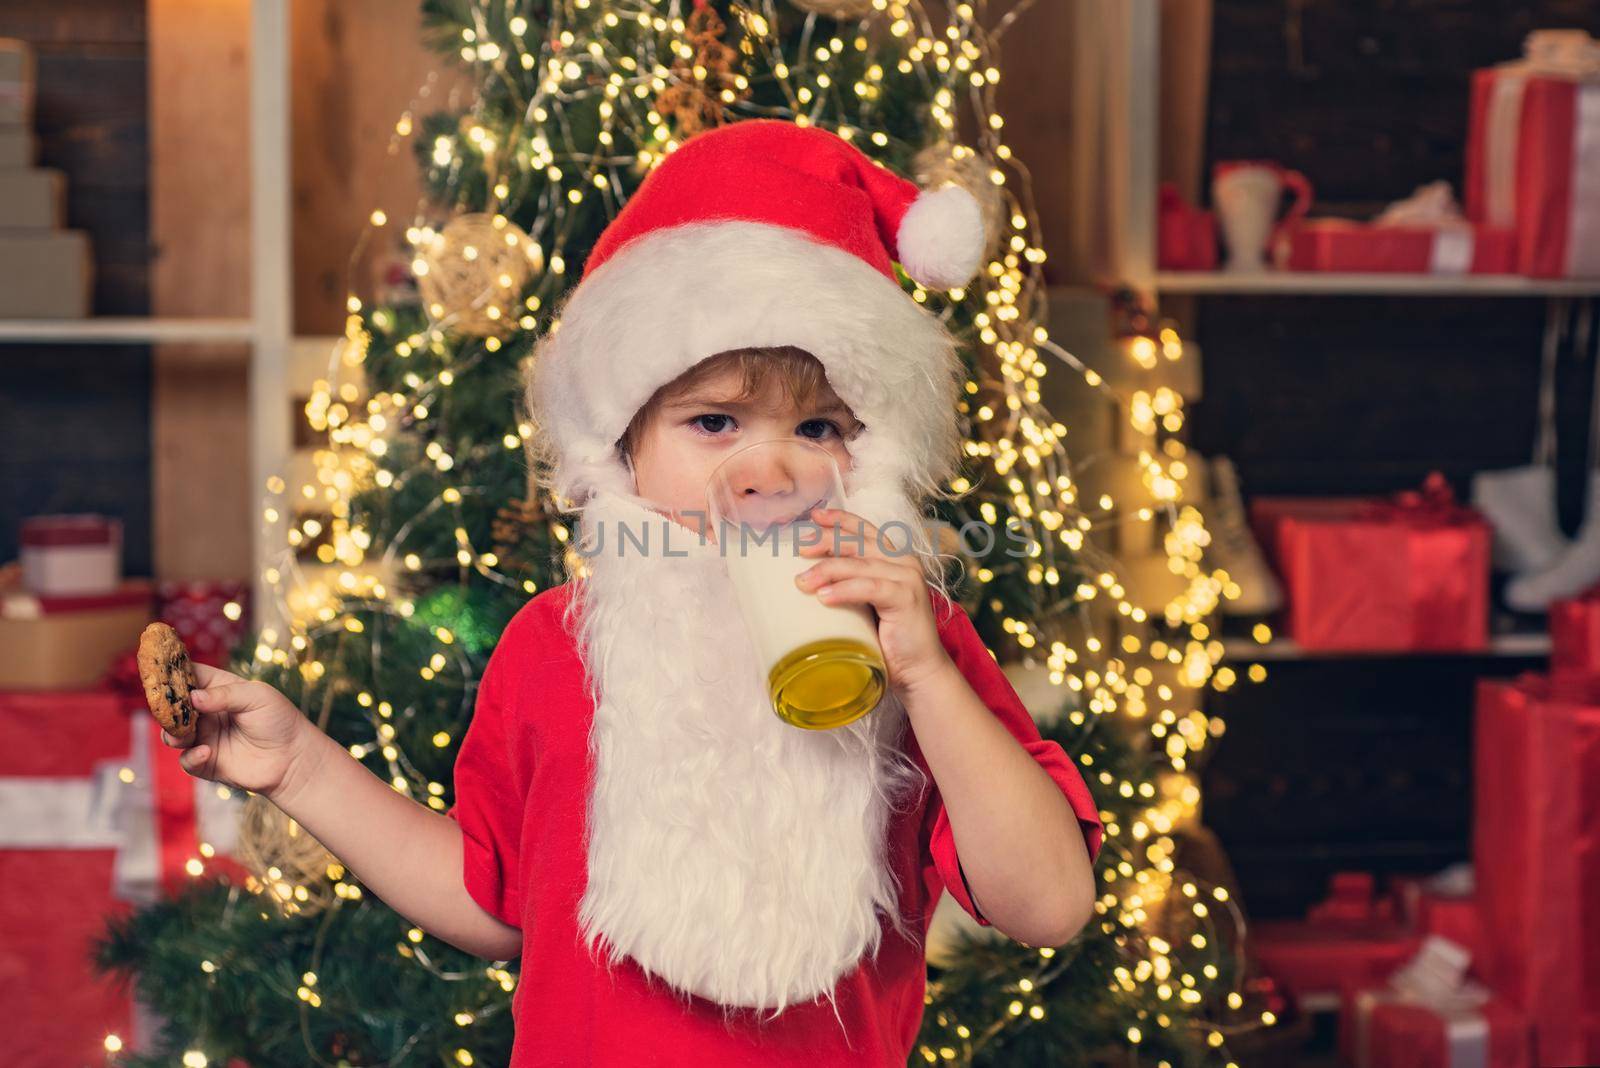 Santa kids picking cookie. Santa fun. Santa Claus takes a cookie on Christmas Eve as a thank you gift for leaving presents. Portrait of little Santa child holding chocolate cookie and glass of milk. by Tverdokhlib